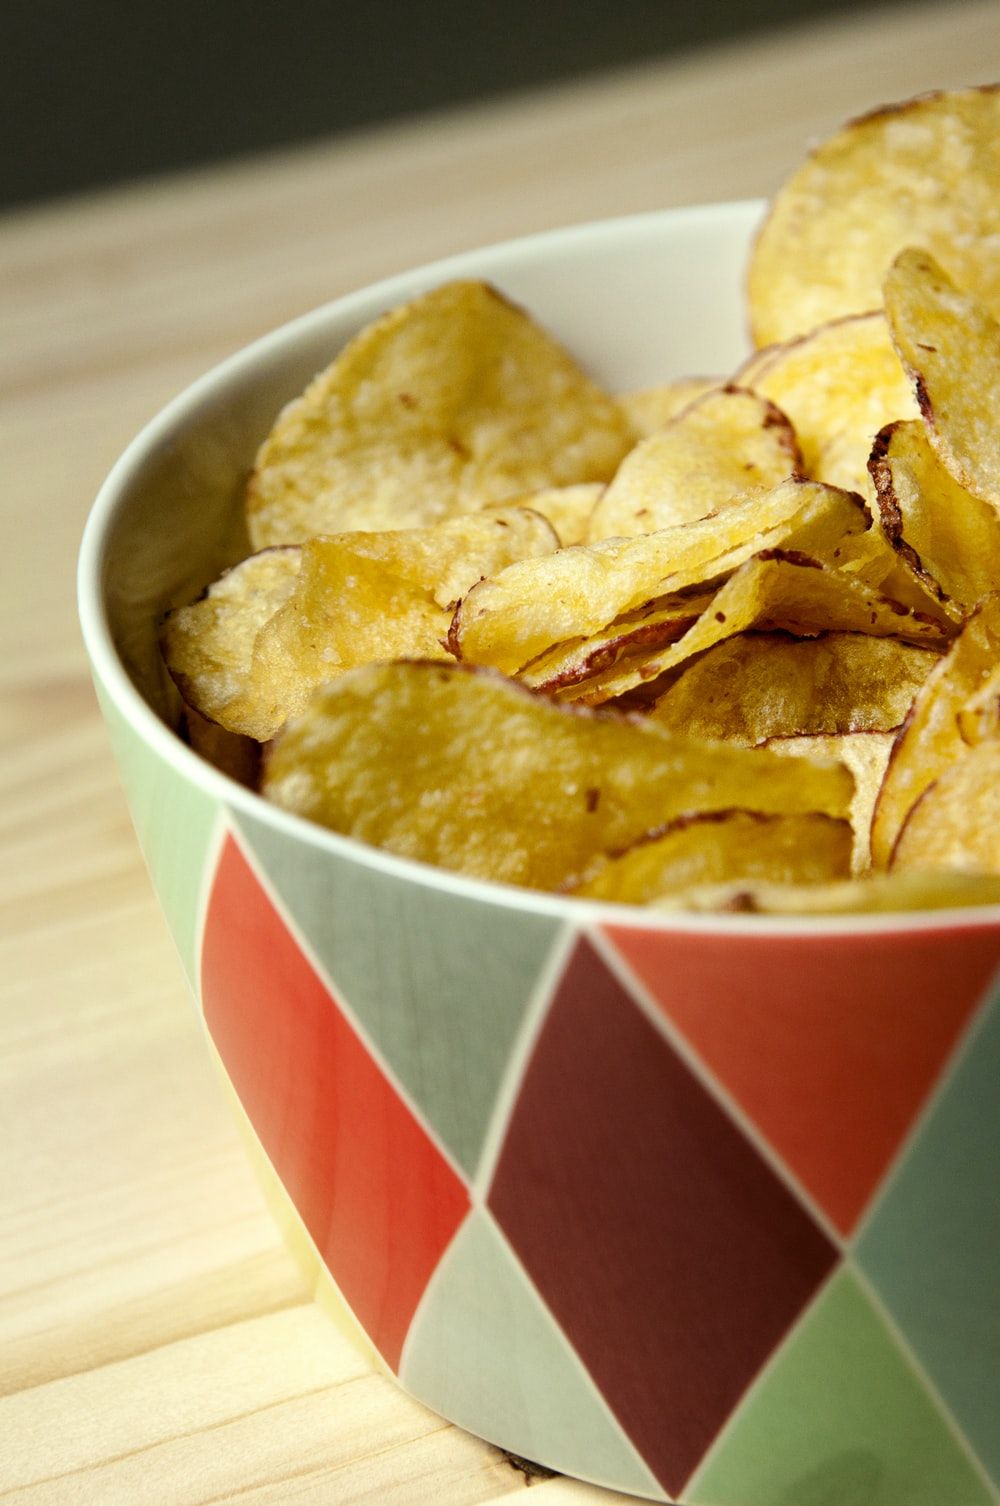 Chips Picture. Download Free Image